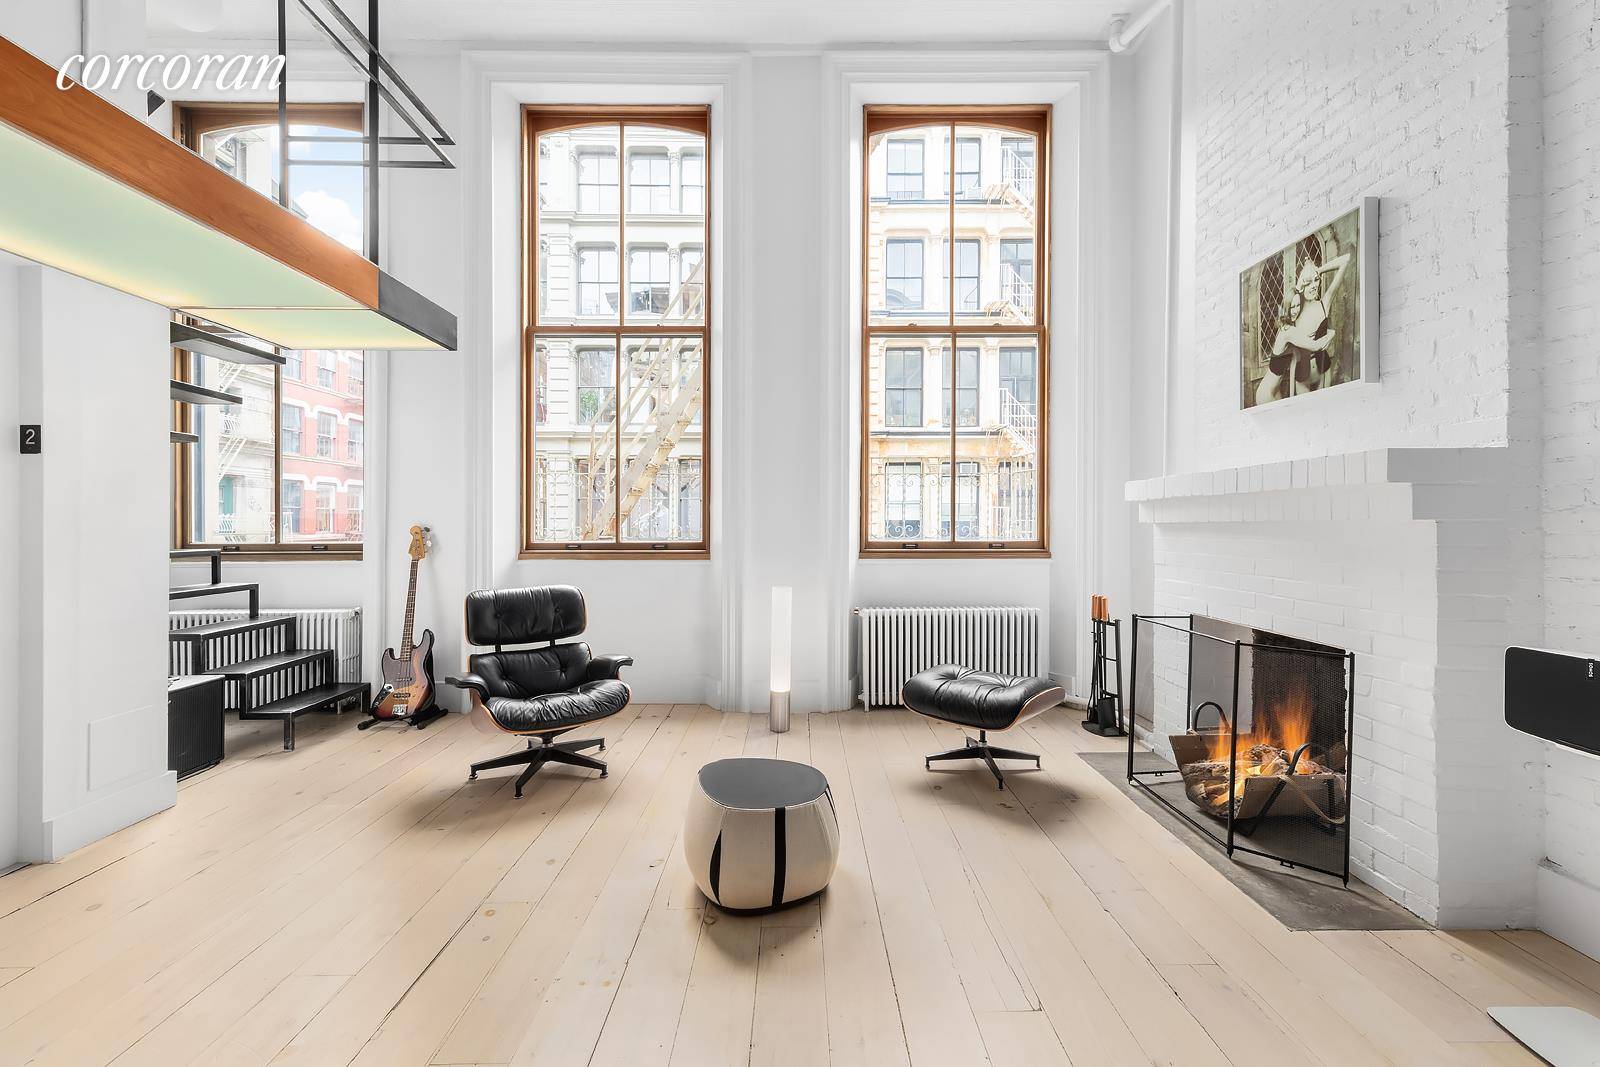 456 Broome Street, 2 Soho, New York A rare, unrivaled living experience awaits at this quintessential luxury loft, idyllically located in the heart of vibrant SoHo.